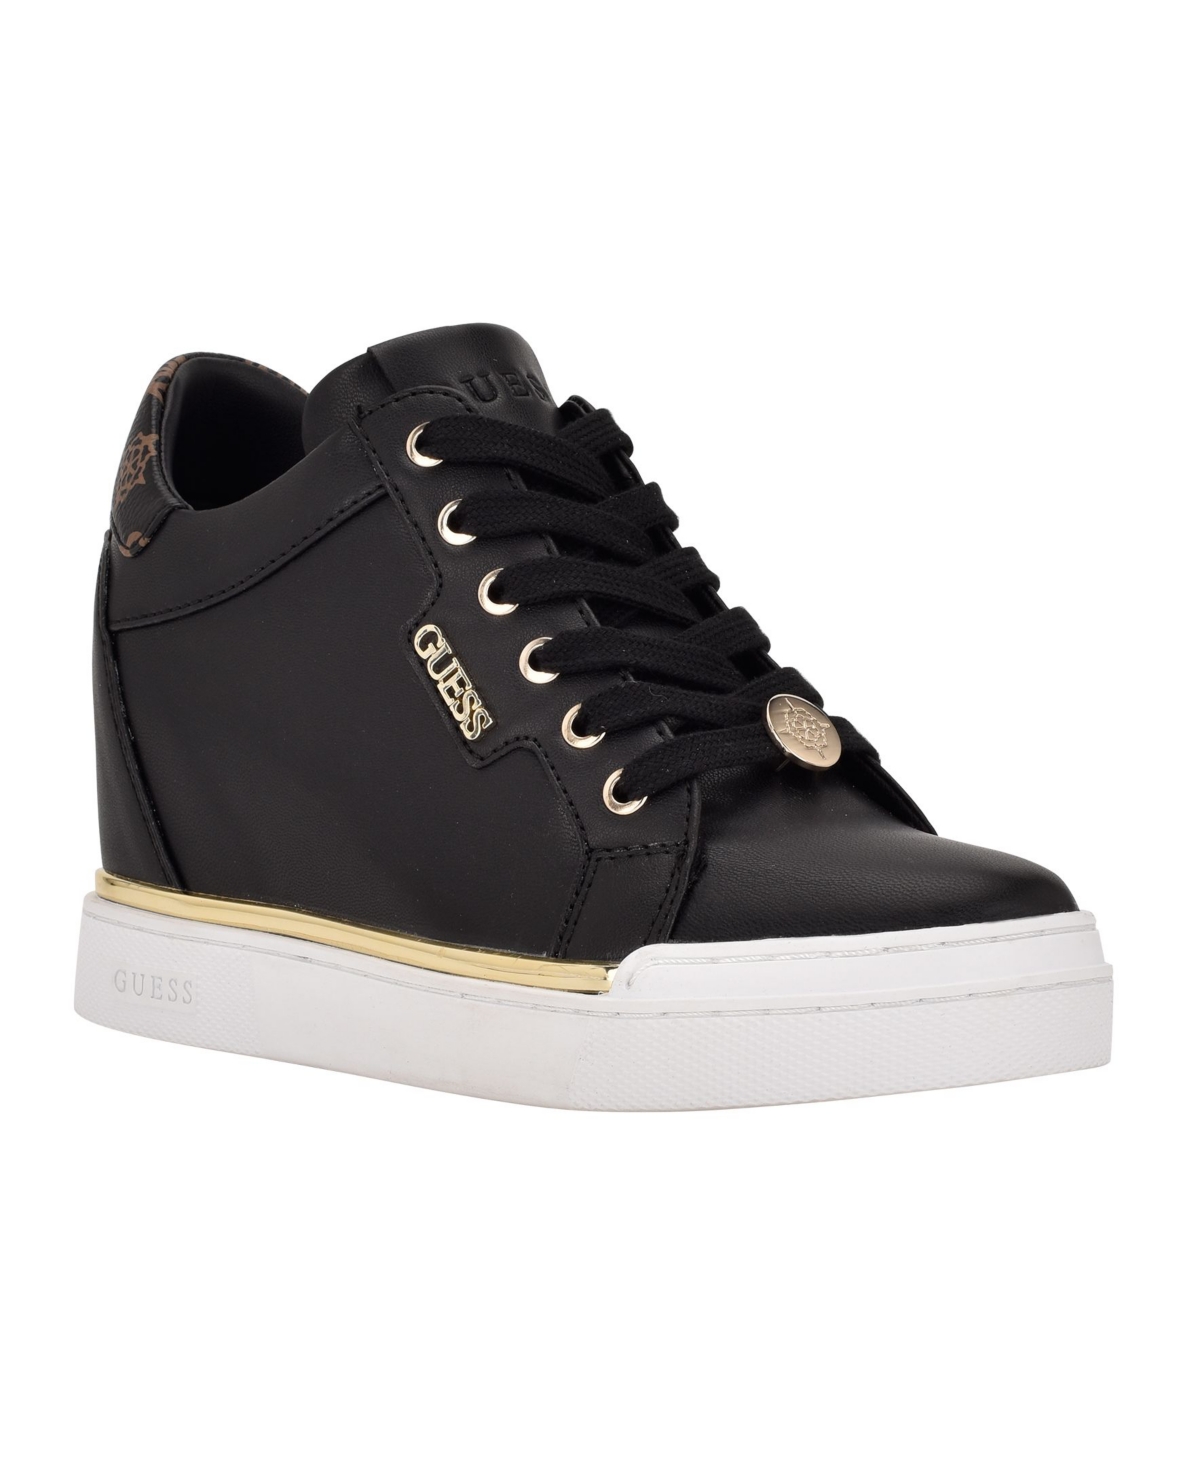 Guess Women's Faster Wedge Sneakers In Black,brown